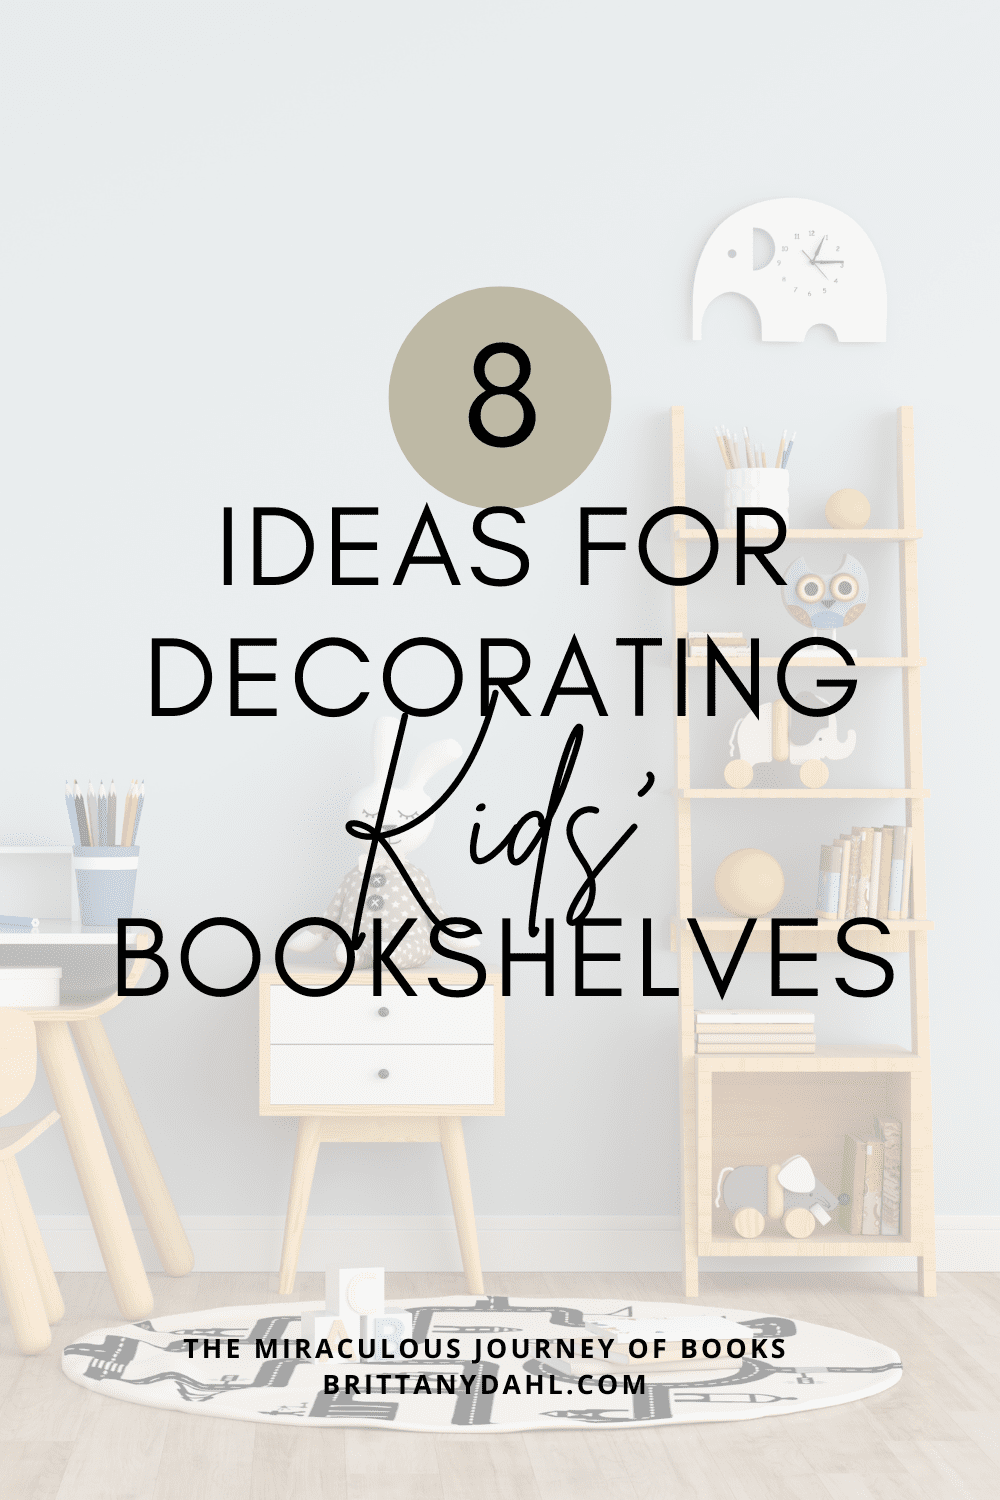 8 Ideas for decorating kids' bookshelves from The Miraculous Journey of Books at Brittanydahl.com. Image of a child's bedroom that includes a desk, nightstand with a doll, and a bookshelf with books and nostalgic toys and items.